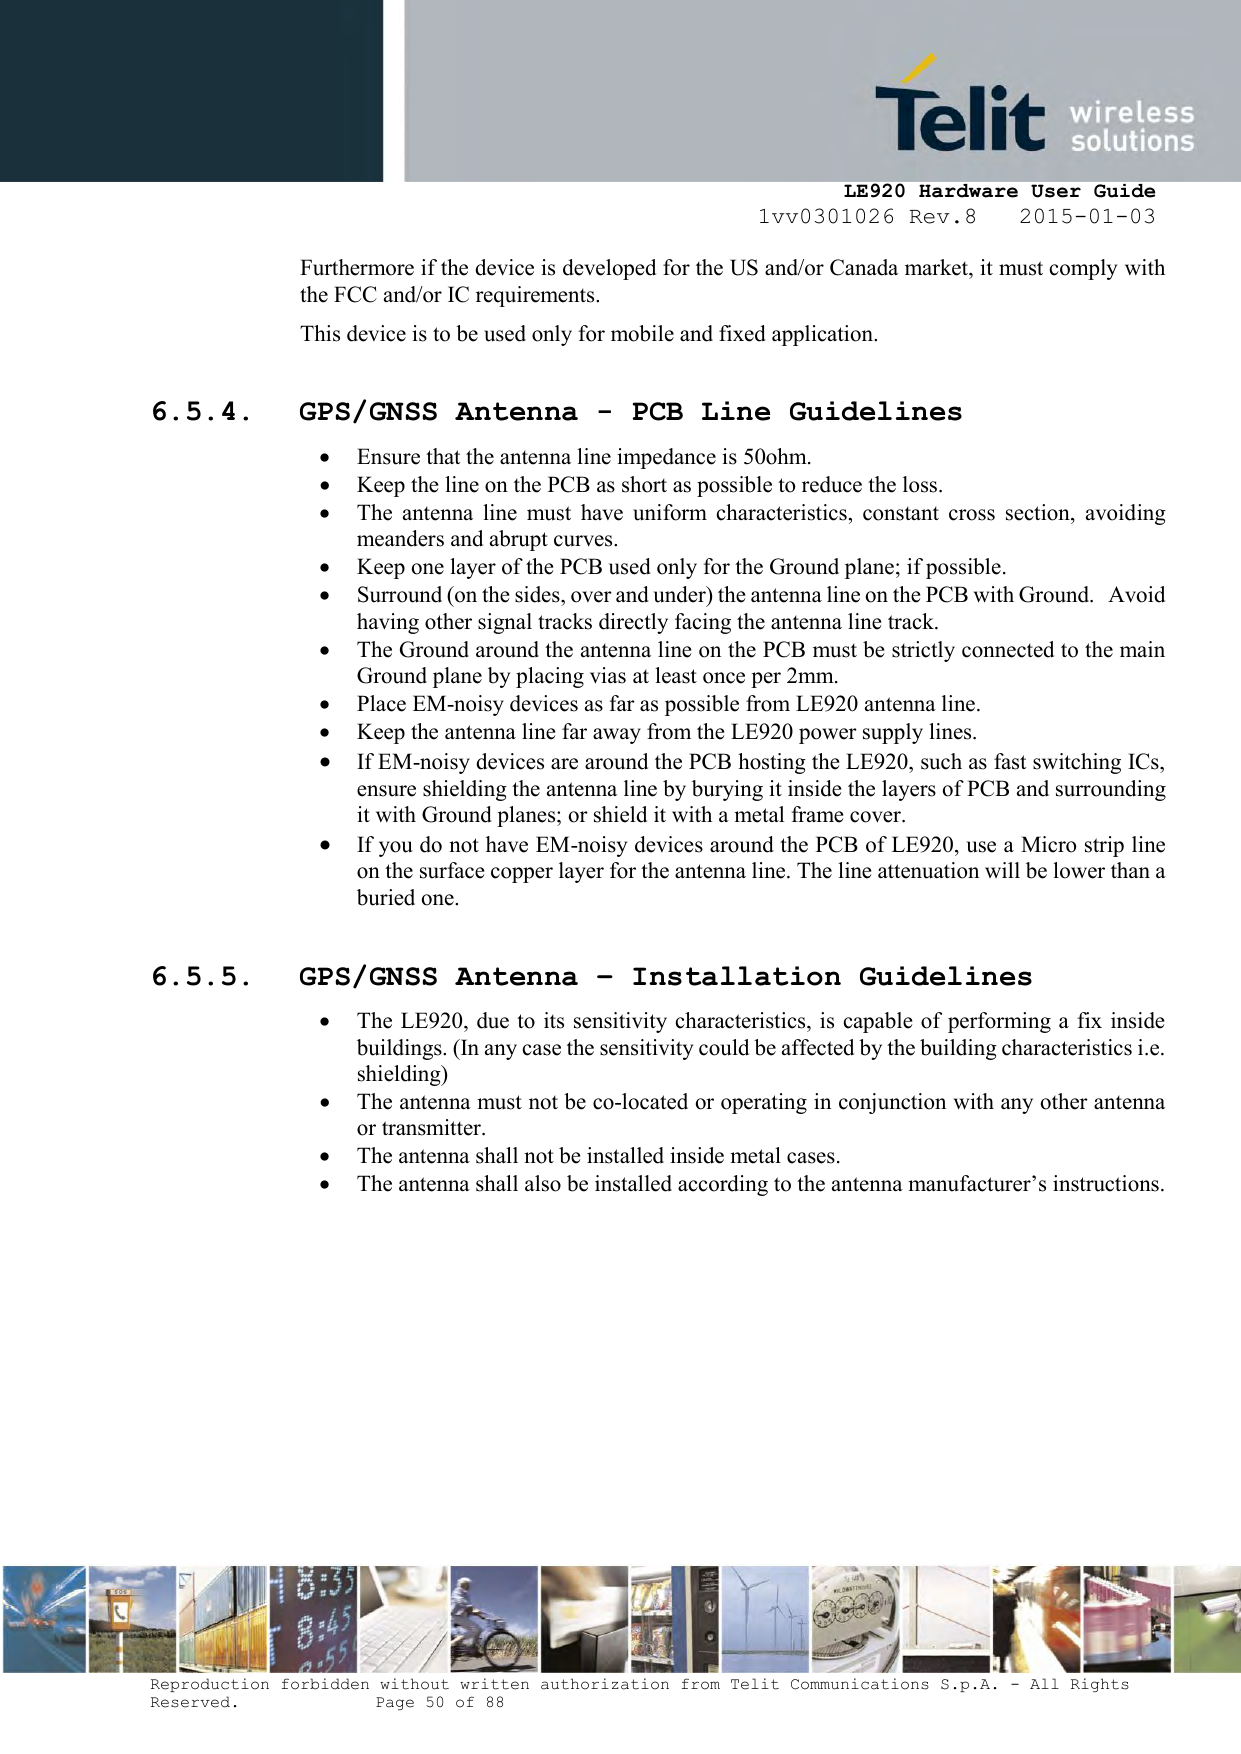     LE920 Hardware User Guide 1vv0301026 Rev.8   2015-01-03 Reproduction forbidden without written authorization from Telit Communications S.p.A. - All Rights Reserved.    Page 50 of 88  Furthermore if the device is developed for the US and/or Canada market, it must comply with the FCC and/or IC requirements. This device is to be used only for mobile and fixed application.   6.5.4. GPS/GNSS Antenna - PCB Line Guidelines  Ensure that the antenna line impedance is 50ohm.  Keep the line on the PCB as short as possible to reduce the loss.  The  antenna  line  must  have  uniform  characteristics,  constant  cross  section,  avoiding meanders and abrupt curves.  Keep one layer of the PCB used only for the Ground plane; if possible.  Surround (on the sides, over and under) the antenna line on the PCB with Ground.   Avoid having other signal tracks directly facing the antenna line track.  The Ground around the antenna line on the PCB must be strictly connected to the main Ground plane by placing vias at least once per 2mm.  Place EM-noisy devices as far as possible from LE920 antenna line.  Keep the antenna line far away from the LE920 power supply lines.   If EM-noisy devices are around the PCB hosting the LE920, such as fast switching ICs, ensure shielding the antenna line by burying it inside the layers of PCB and surrounding it with Ground planes; or shield it with a metal frame cover.  If you do not have EM-noisy devices around the PCB of LE920, use a Micro strip line on the surface copper layer for the antenna line. The line attenuation will be lower than a buried one. 6.5.5. GPS/GNSS Antenna – Installation Guidelines  The LE920, due to  its sensitivity characteristics, is capable of performing a fix inside buildings. (In any case the sensitivity could be affected by the building characteristics i.e. shielding)  The antenna must not be co-located or operating in conjunction with any other antenna or transmitter.  The antenna shall not be installed inside metal cases.  The antenna shall also be installed according to the antenna manufacturer’s instructions.   